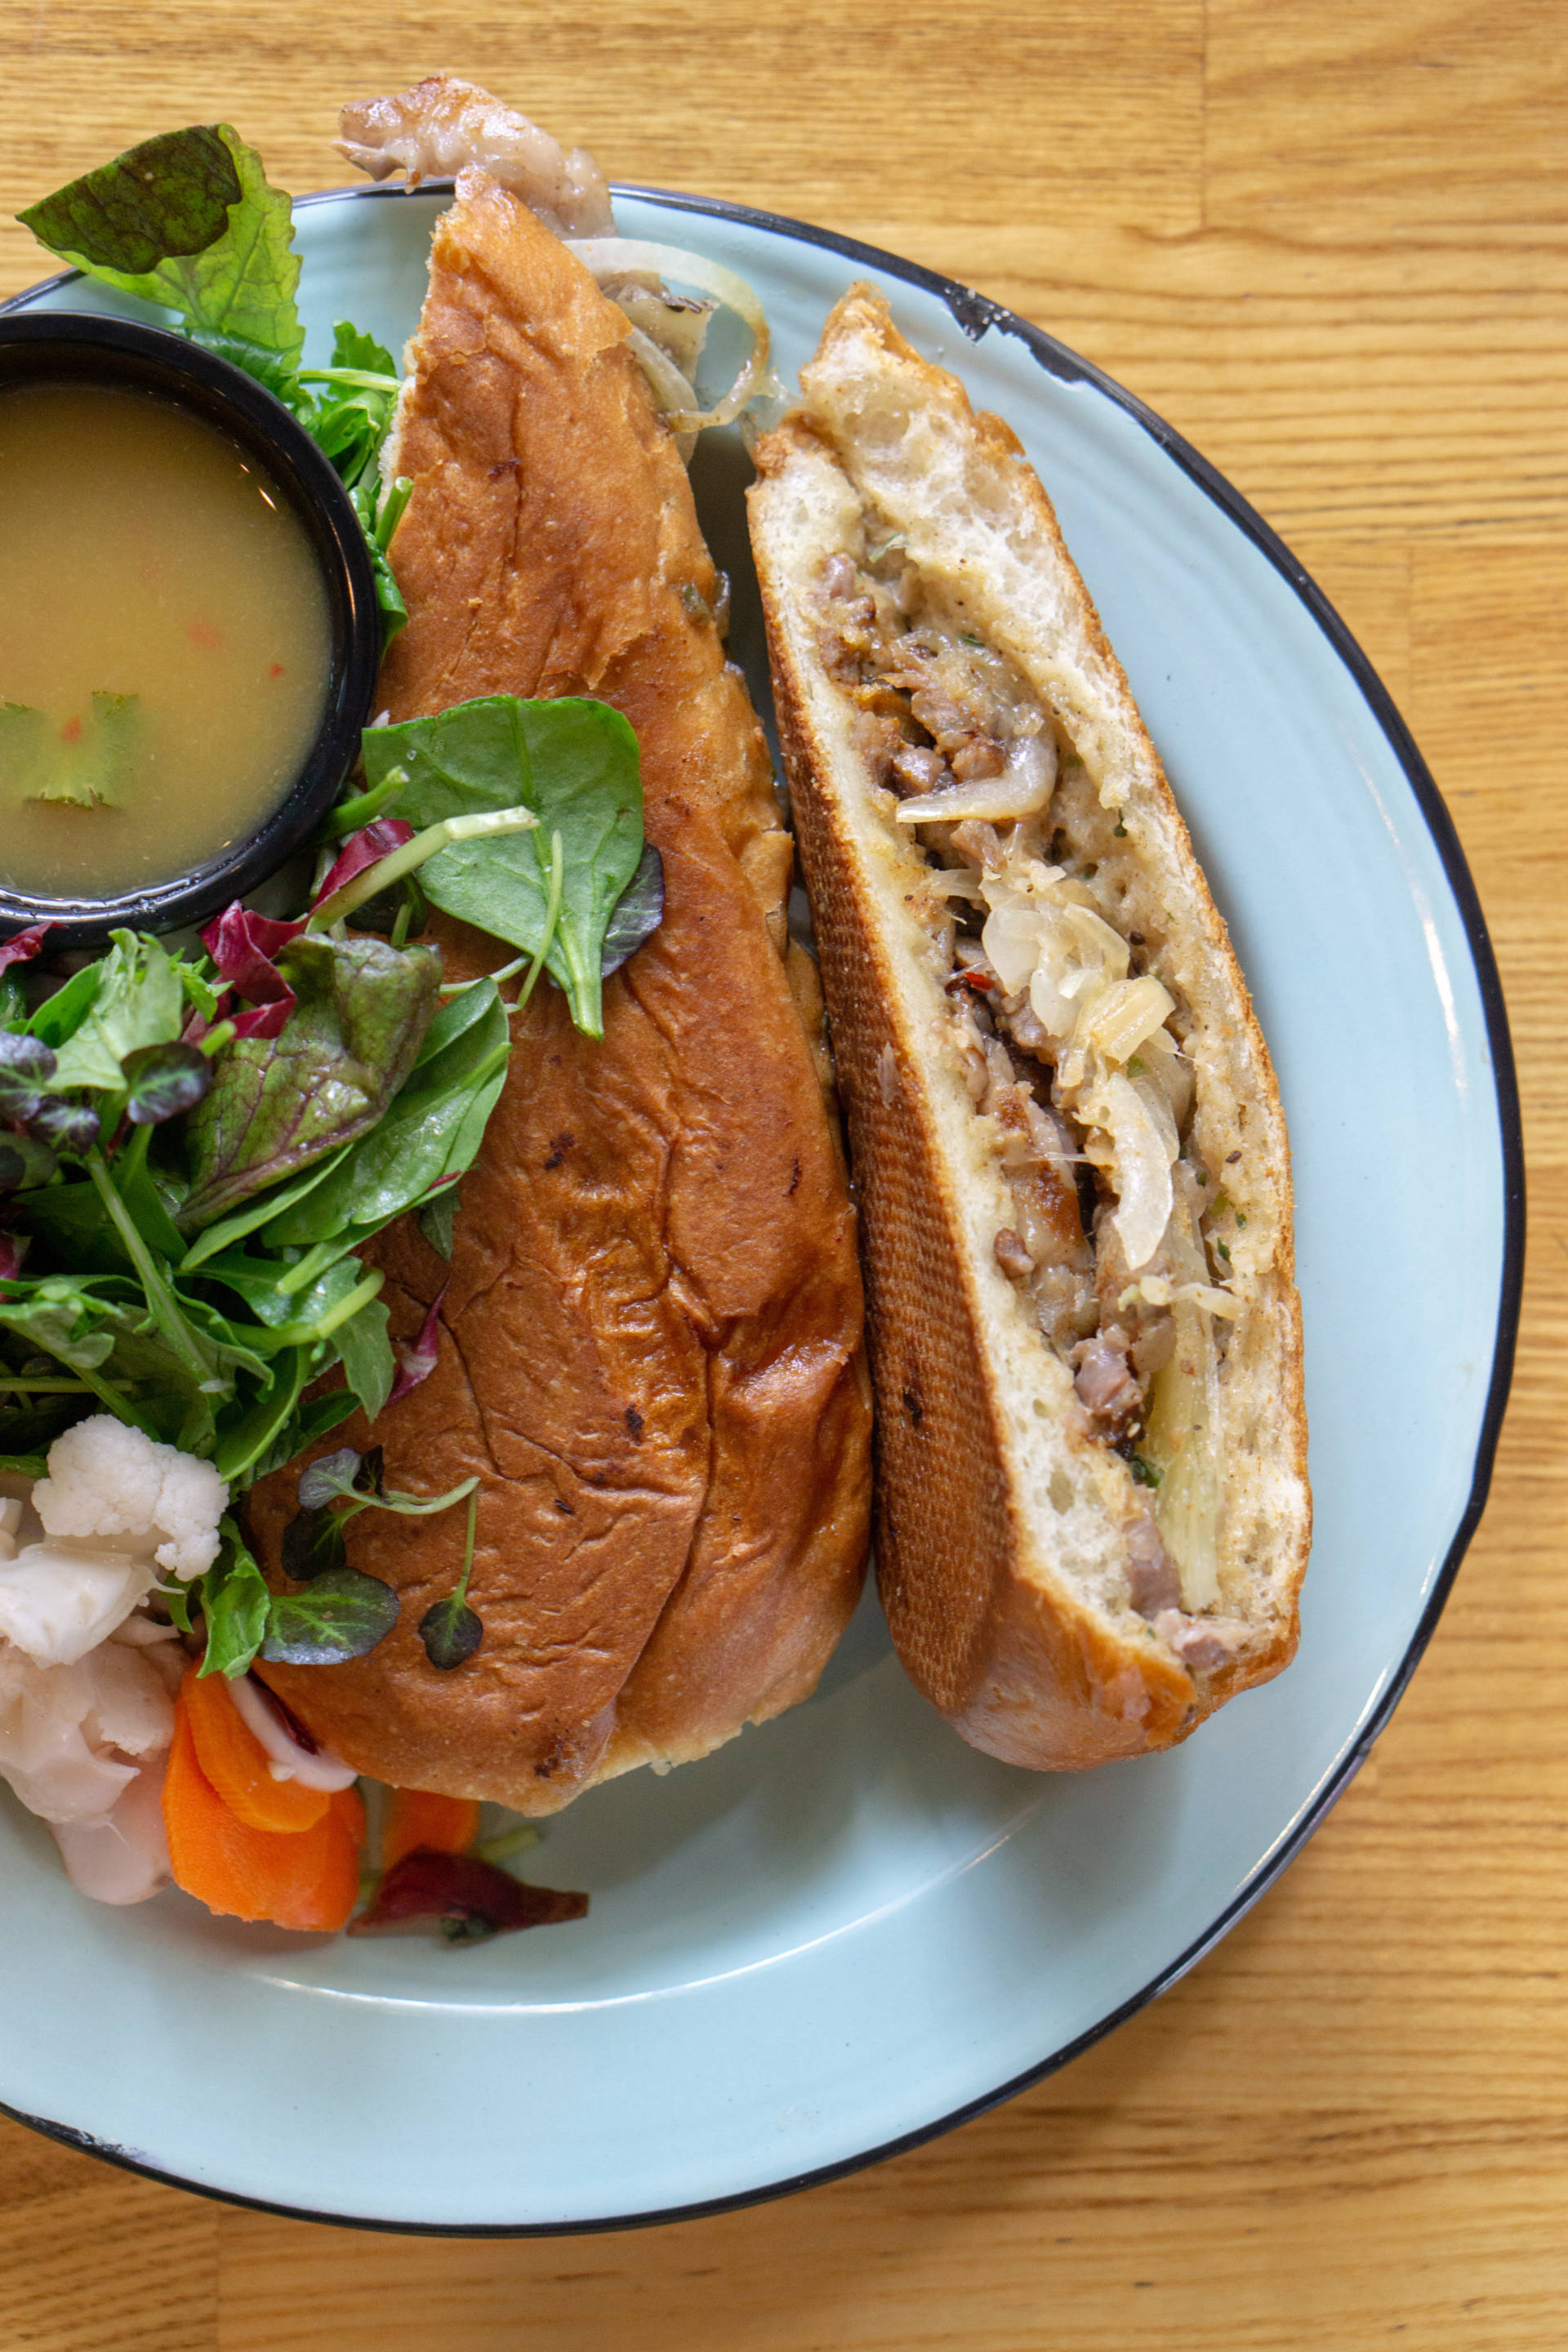 The Cubano comes with pickled vegetables, mixed greens and shoestring fries.